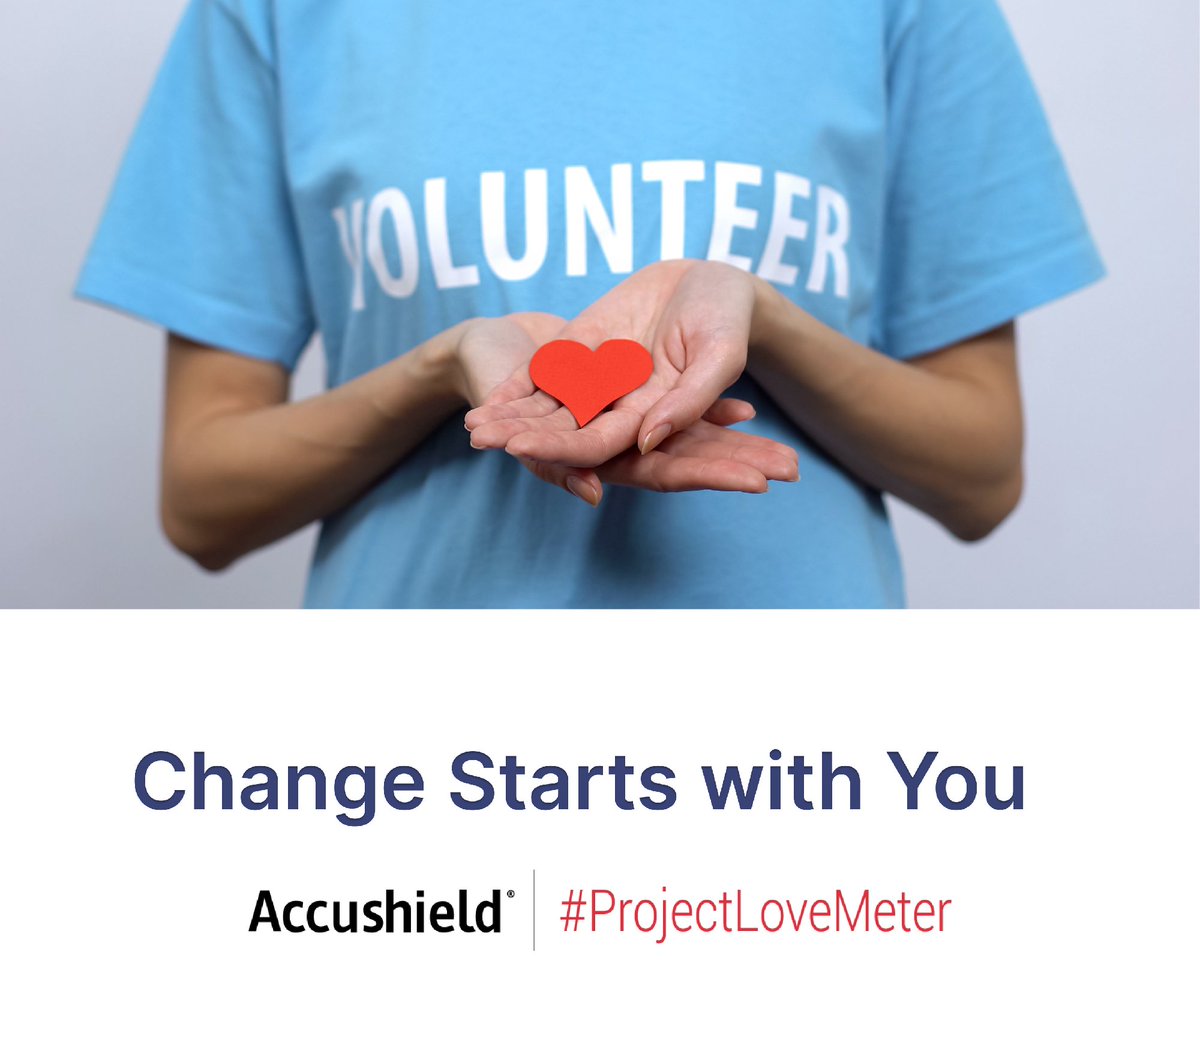 As National Volunteer Week comes to a close, let's carry the momentum forward. Join the Accushield Volunteer Network to help reduce loneliness risks in skilled nursing and senior living communities.

Apply Now! hubs.ly/Q02tJvxx0

#NVW2024 #ProjectLoveMeter #ChangeStartsHere